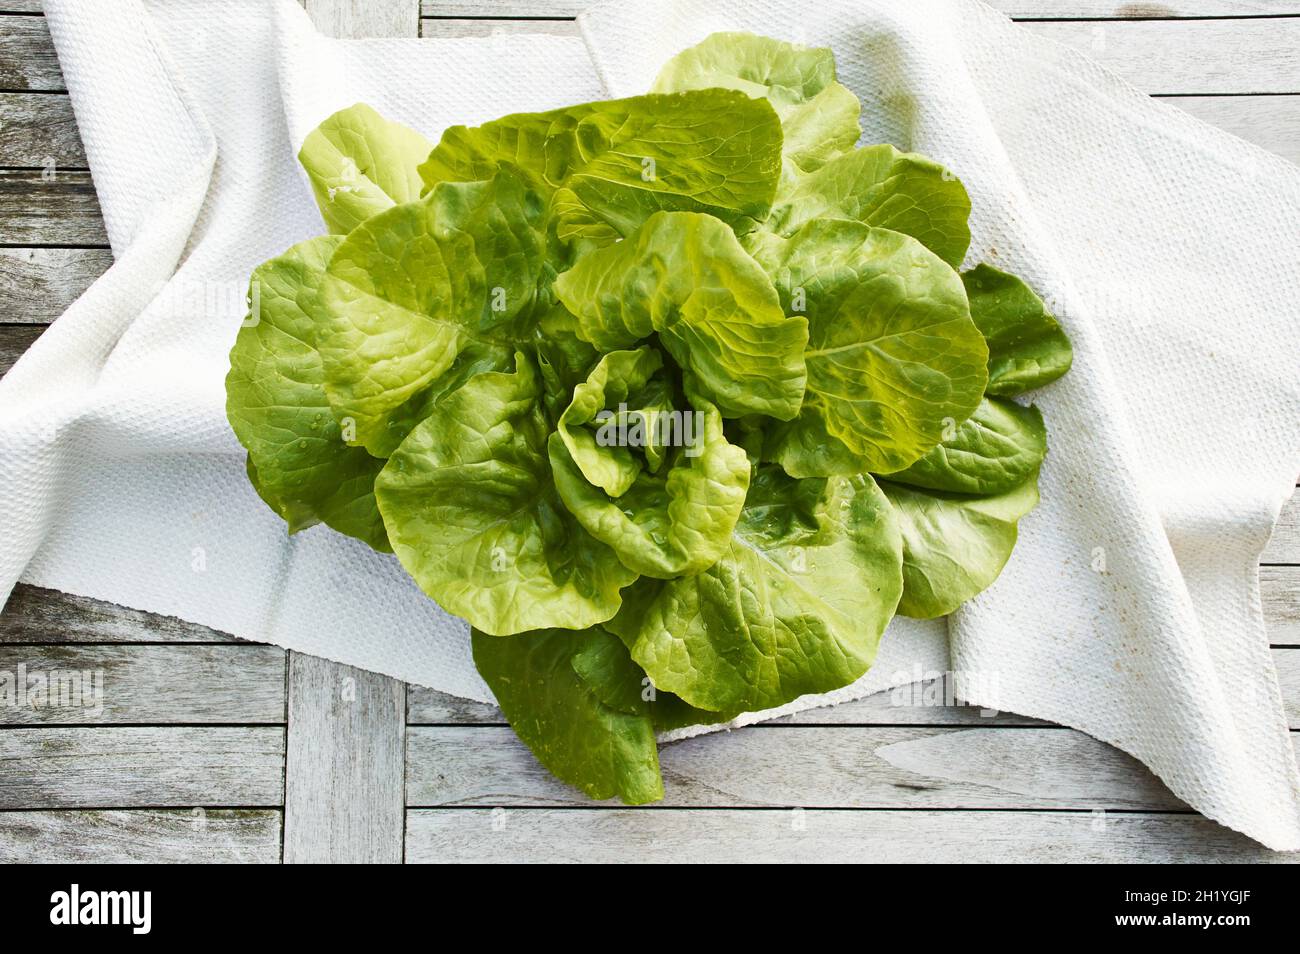 Oak leaf lettuce (topic: light suppers) Stock Photo